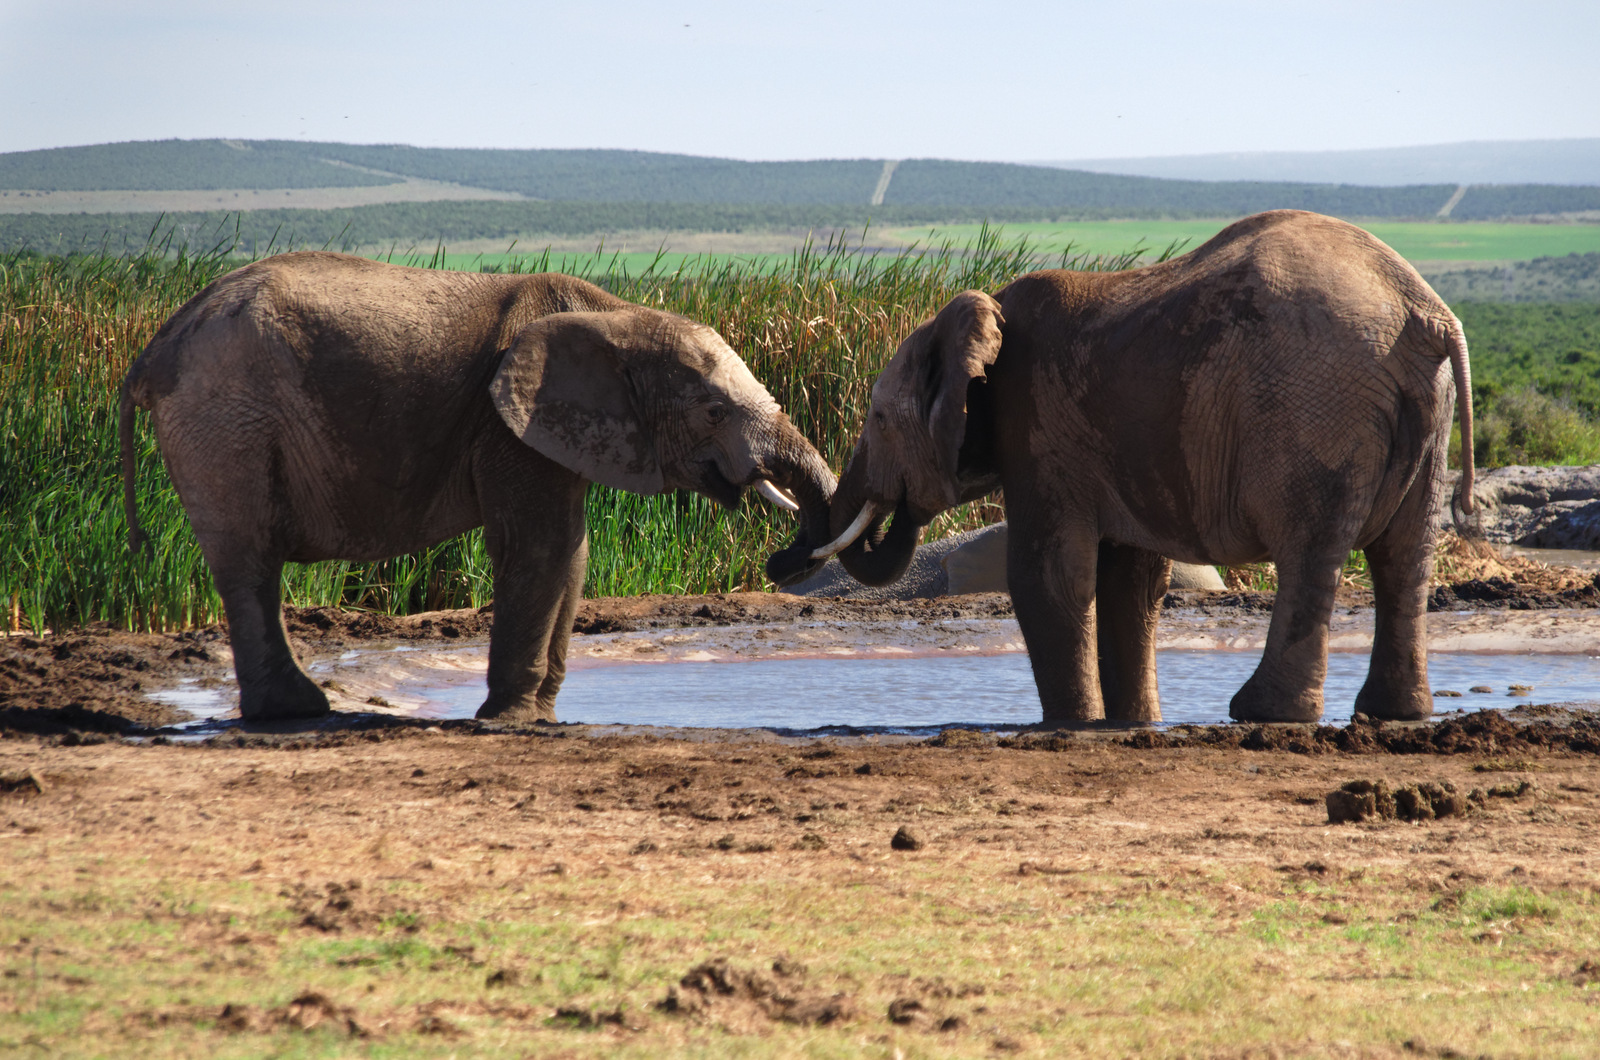 Researchers identified various communication signals, including vocalizations like roars, trumpets, and bellows, combined with various body acts such as ear movements, tail wagging, and trunk swinging. These signals, combined in intricate sequences, create complex multimodal interactions among the elephants.